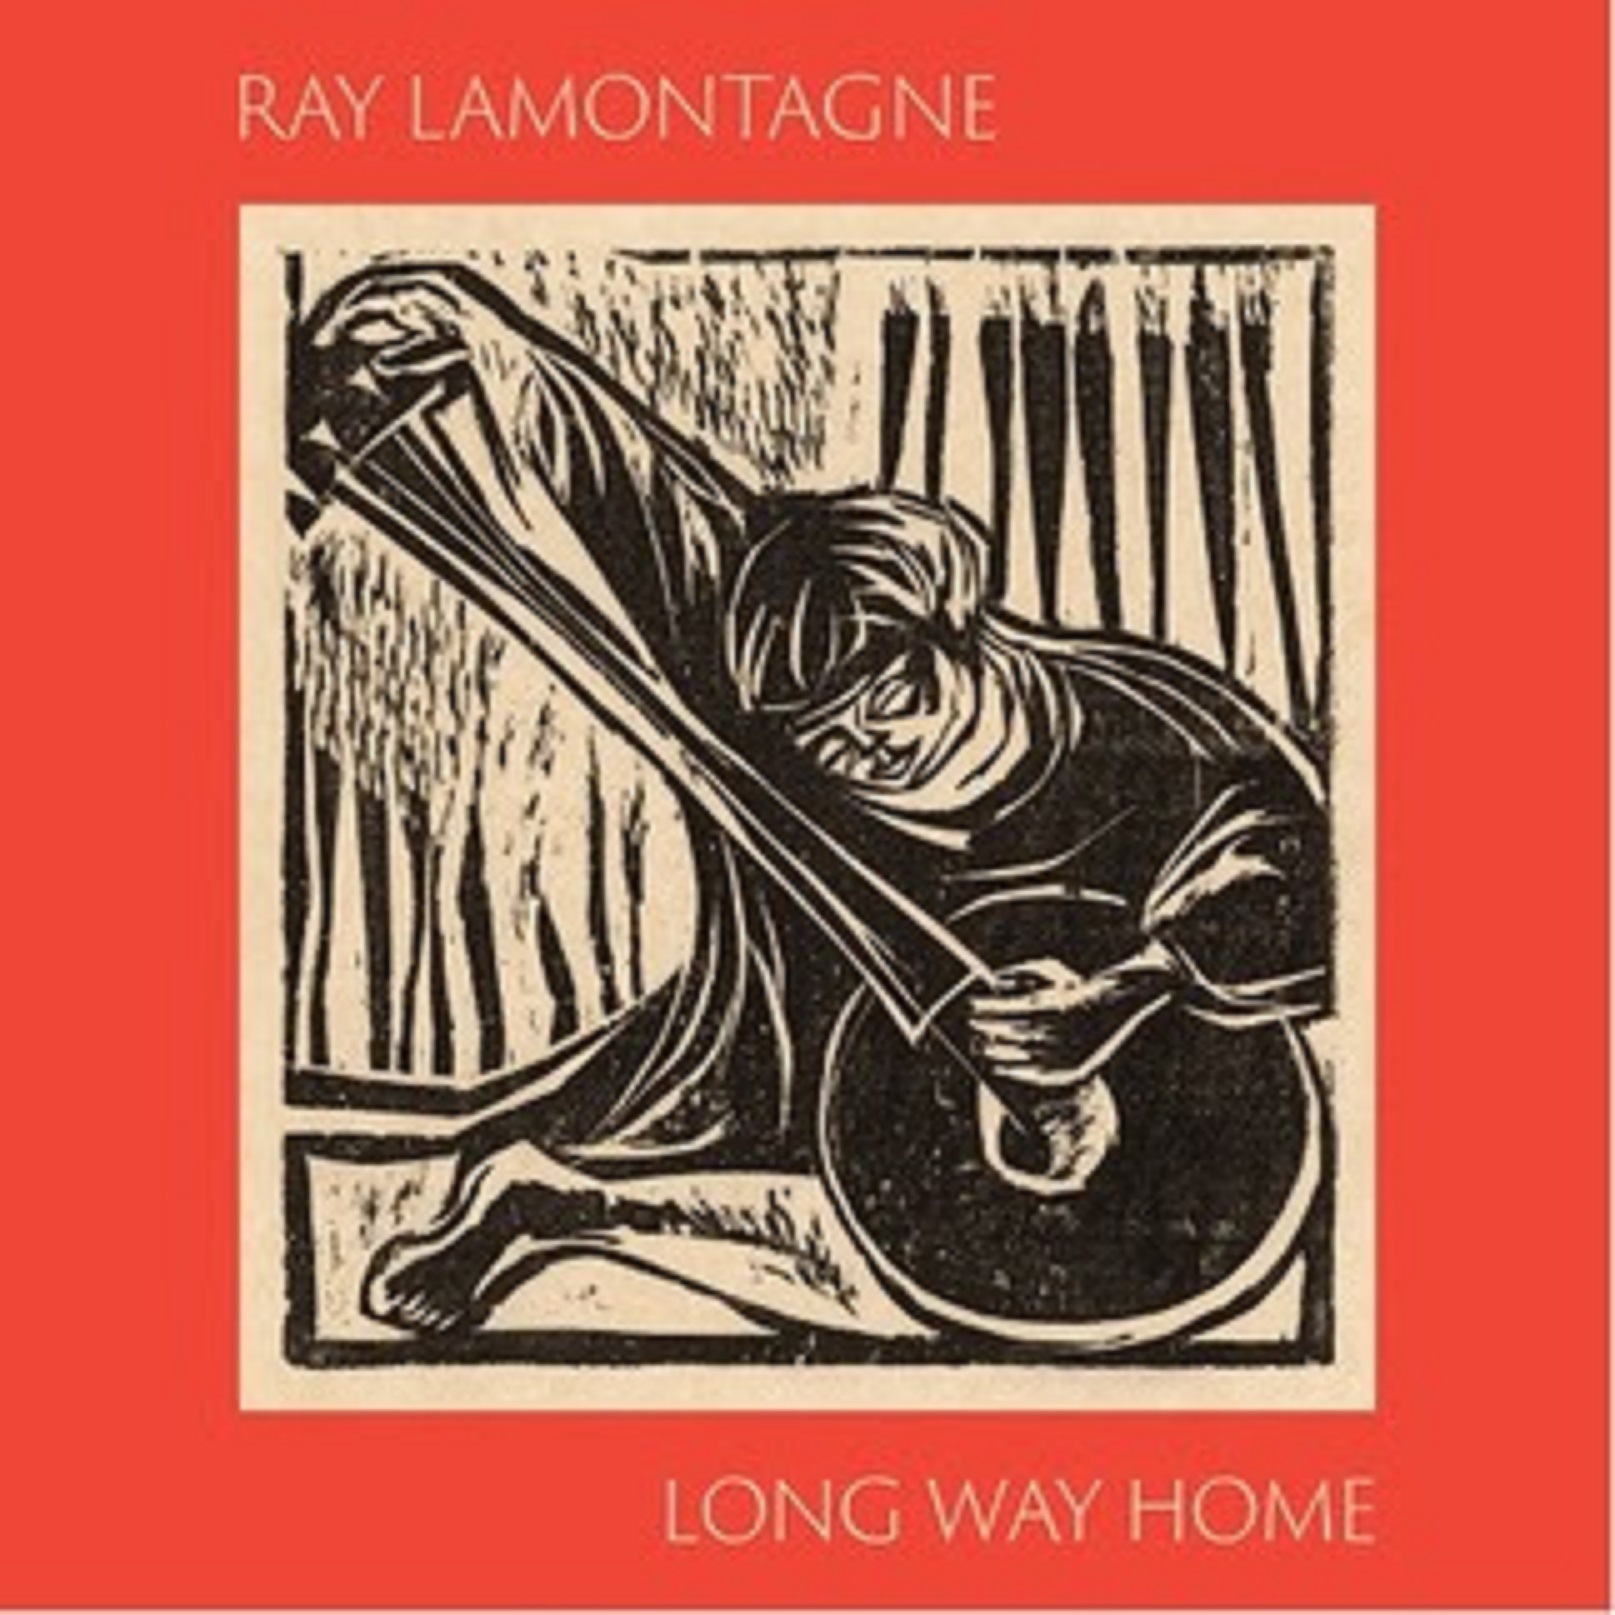 Ray LaMontagne unveils second single "Long Way Home" taken from highly anticipated studio album 'Long Way Home' out August 16